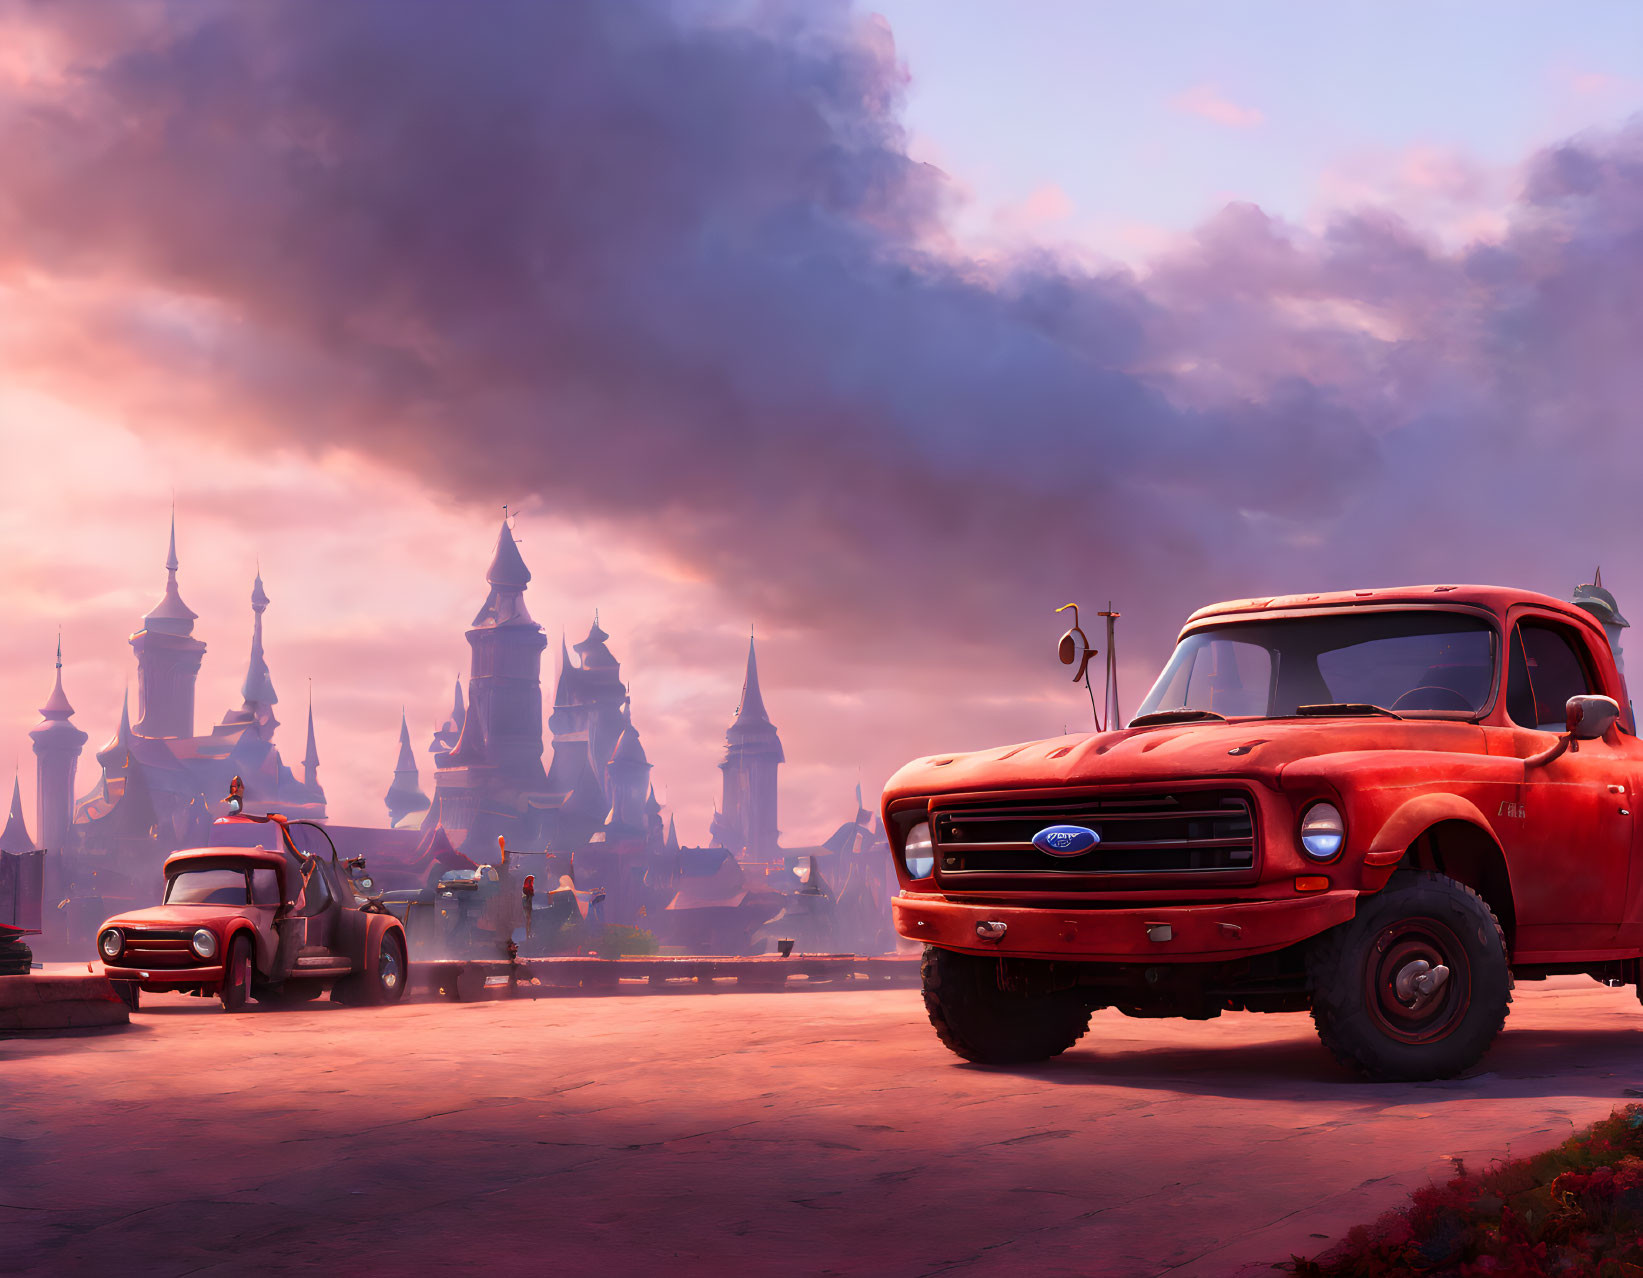 Red vintage truck and character in front of fairy tale castle spires in animated scene